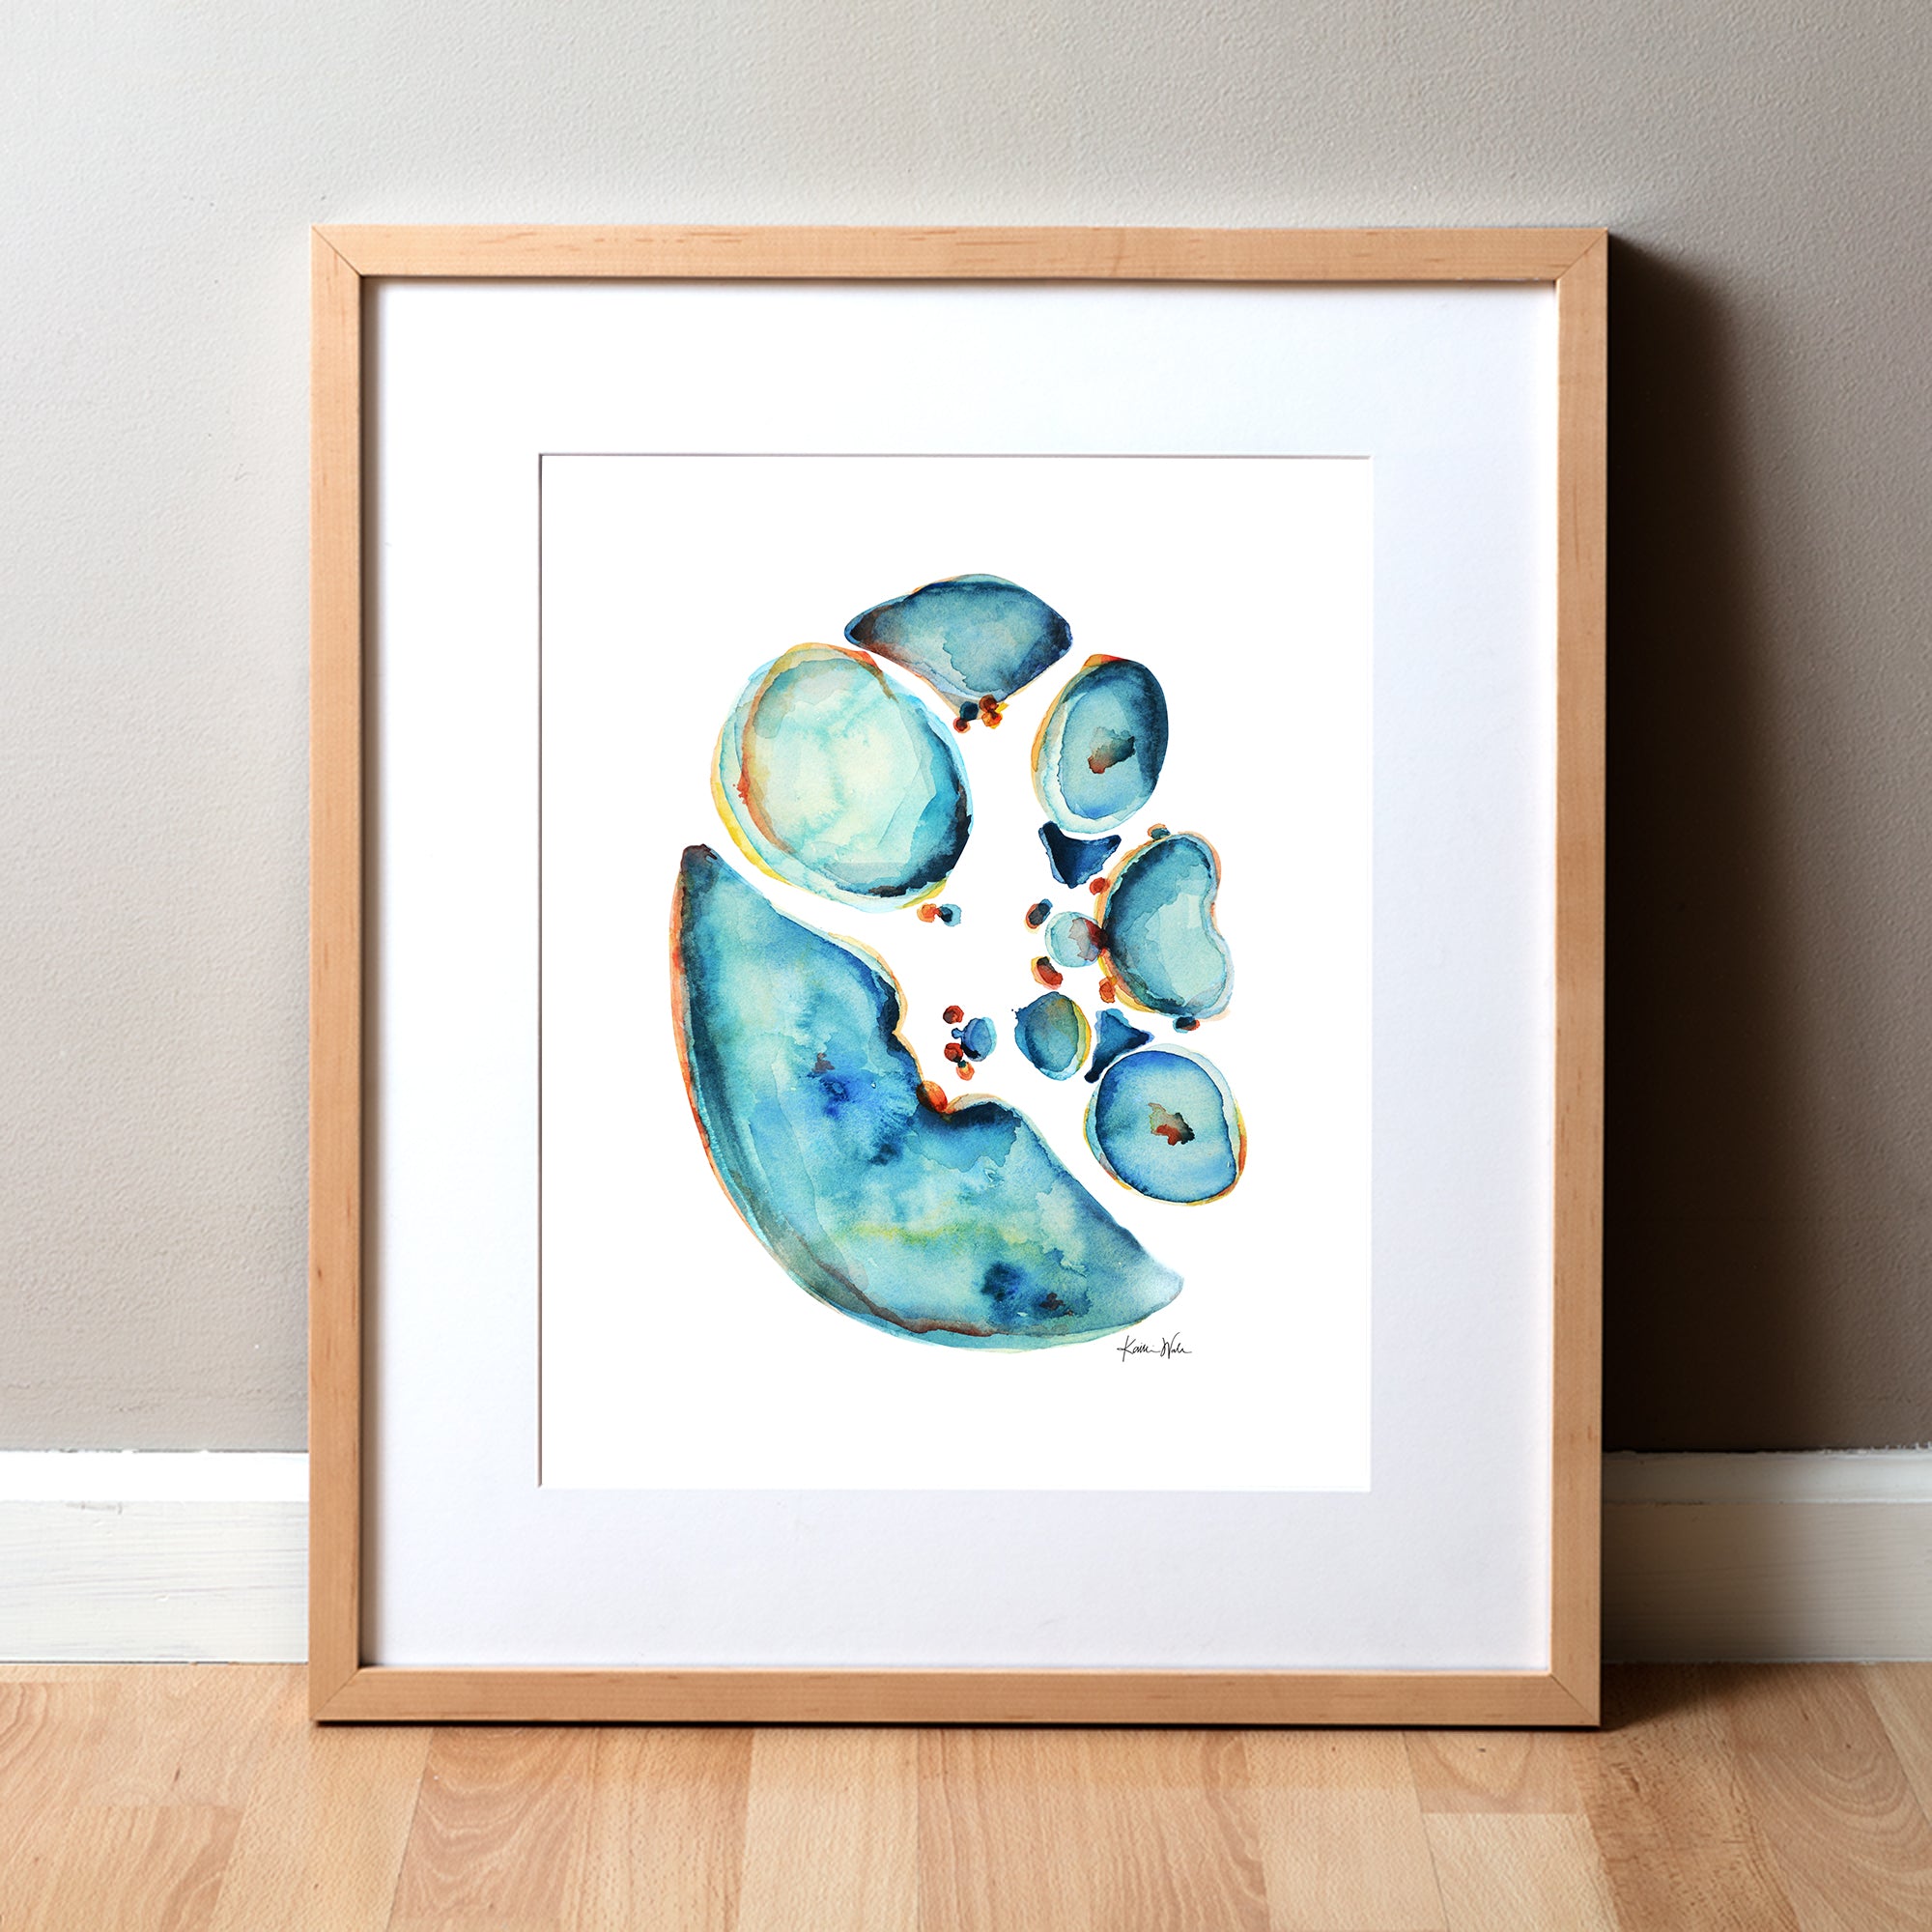 Framed watercolor painting showing a cross section of an abdomen in blues and teals with pops of orange and yellow.